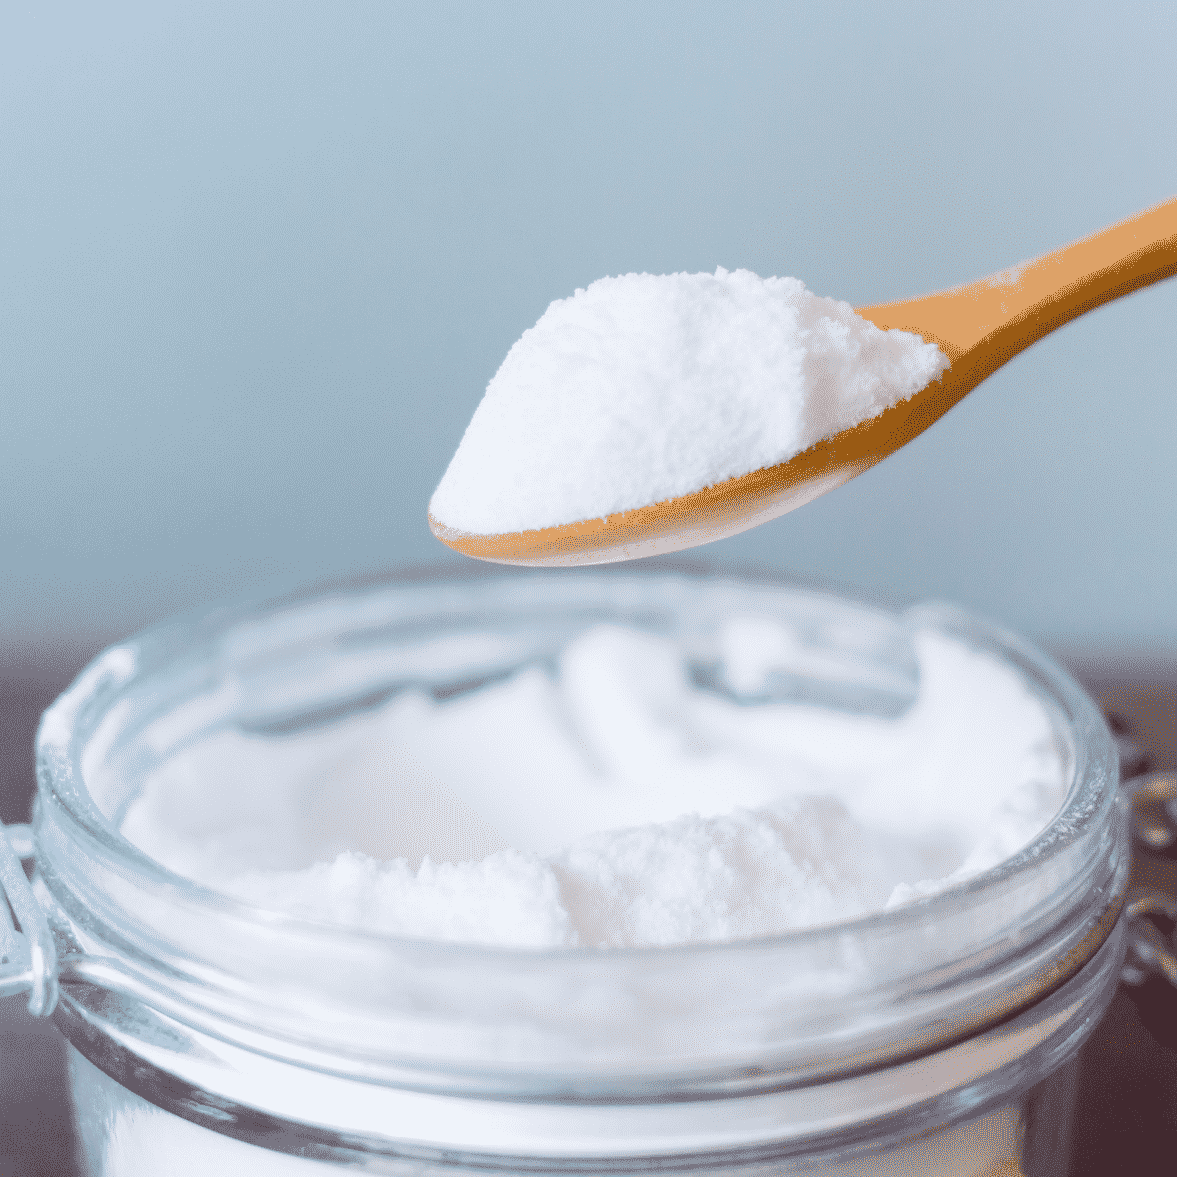 14 Surprising Uses for Baking Soda - PureWow